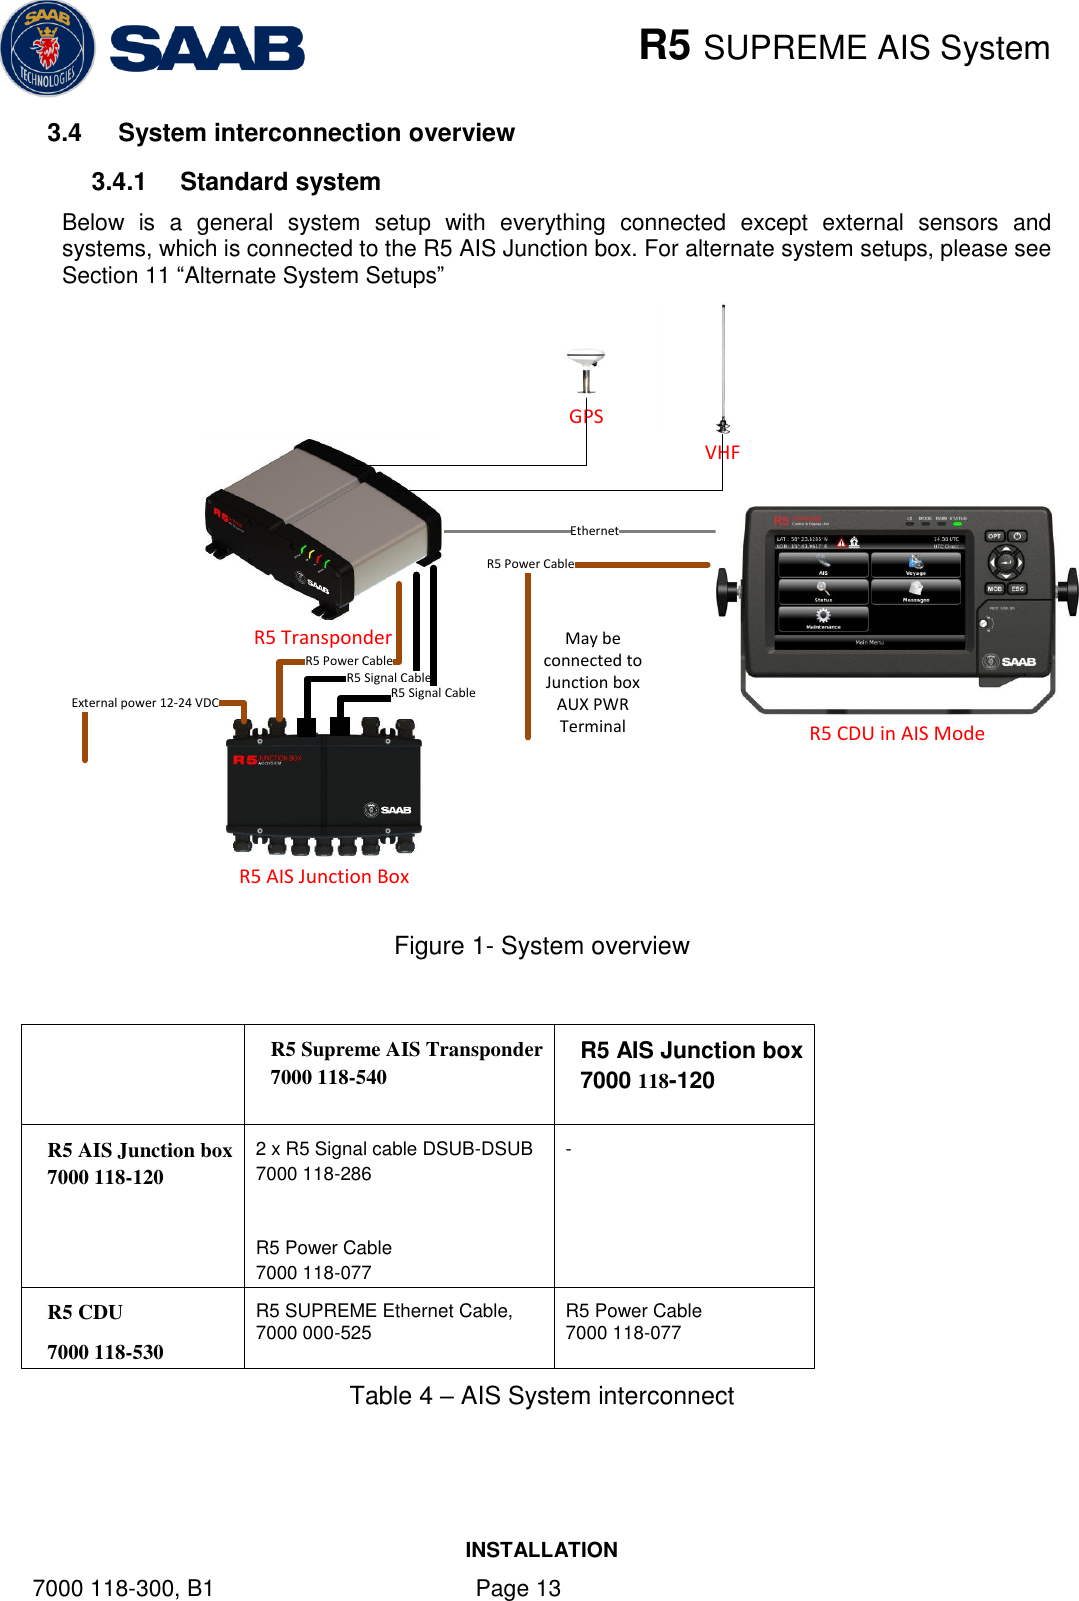    R5 SUPREME AIS System INSTALLATION 7000 118-300, B1    Page 13 3.4  System interconnection overview 3.4.1  Standard system Below  is  a  general  system  setup  with  everything  connected  except  external  sensors  and systems, which is connected to the R5 AIS Junction box. For alternate system setups, please see Section 11 “Alternate System Setups” R5 AIS Junction BoxEthernetExternal power 12-24 VDCR5 Transponder                  R5 Signal CableR5 Signal CableR5 Power CableR5 CDU in AIS ModeR5 Power CableMay be connected to Junction box AUX PWR TerminalVHFGPS Figure 1- System overview   R5 Supreme AIS Transponder 7000 118-540 R5 AIS Junction box 7000 118-120  R5 AIS Junction box 7000 118-120 2 x R5 Signal cable DSUB-DSUB 7000 118-286  R5 Power Cable 7000 118-077 - R5 CDU 7000 118-530 R5 SUPREME Ethernet Cable, 7000 000-525 R5 Power Cable 7000 118-077 Table 4 – AIS System interconnect    